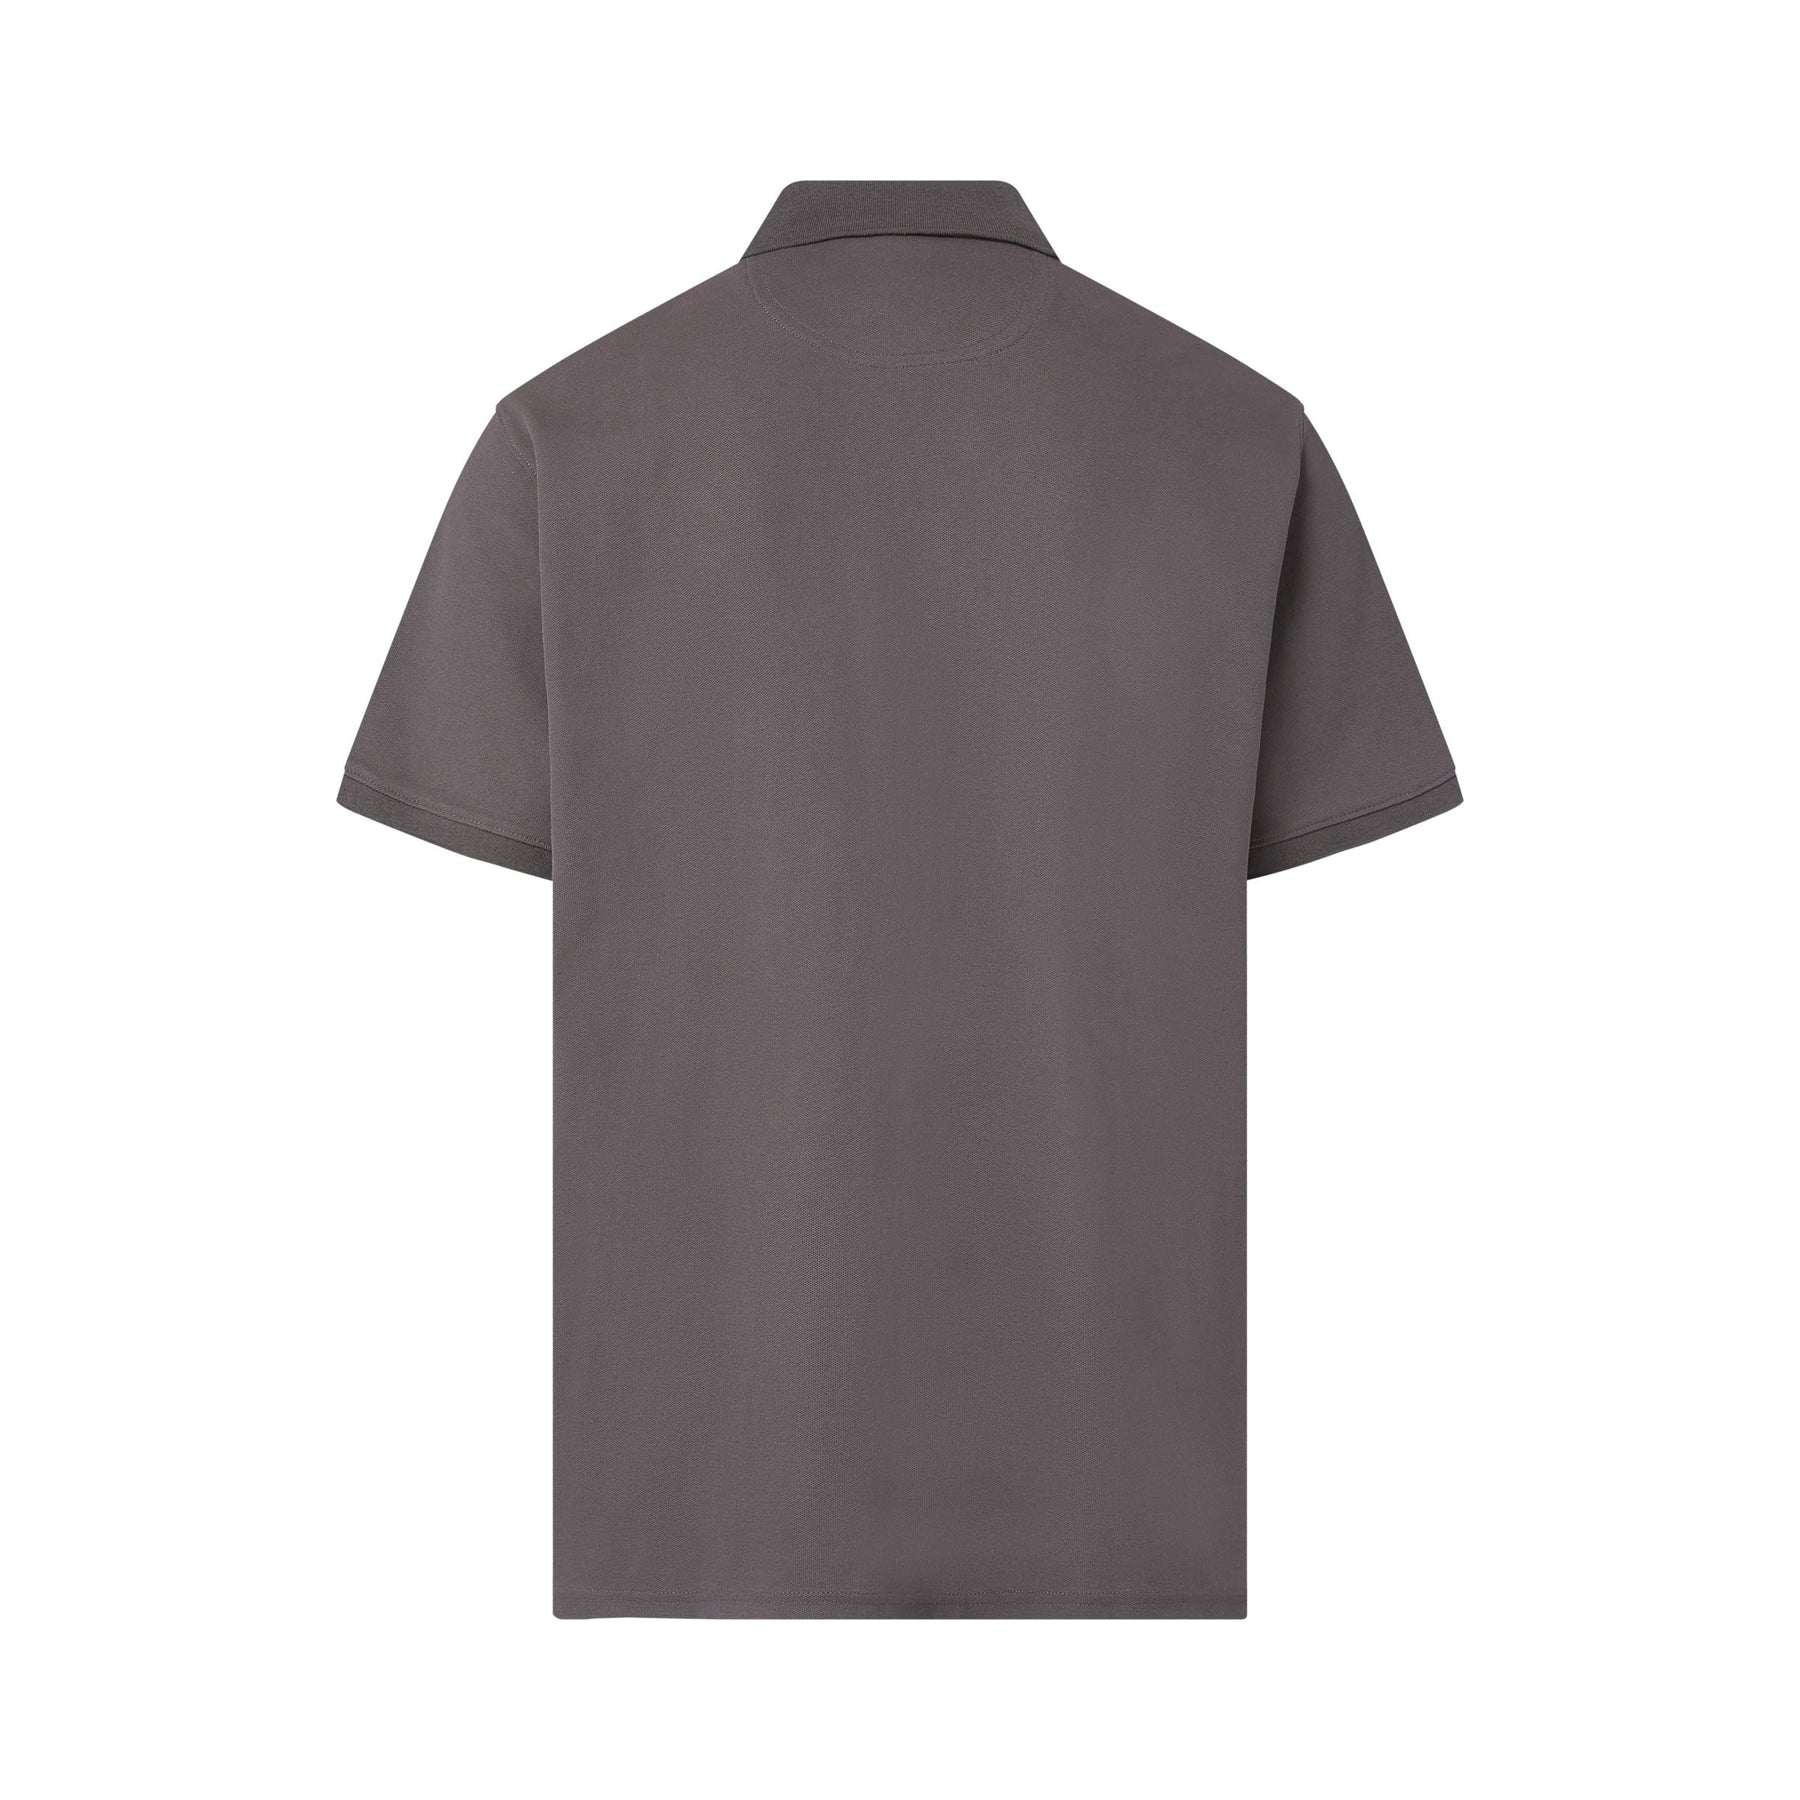 Grey Pique Knit Short Sleeve Polo with Magnetic Closures